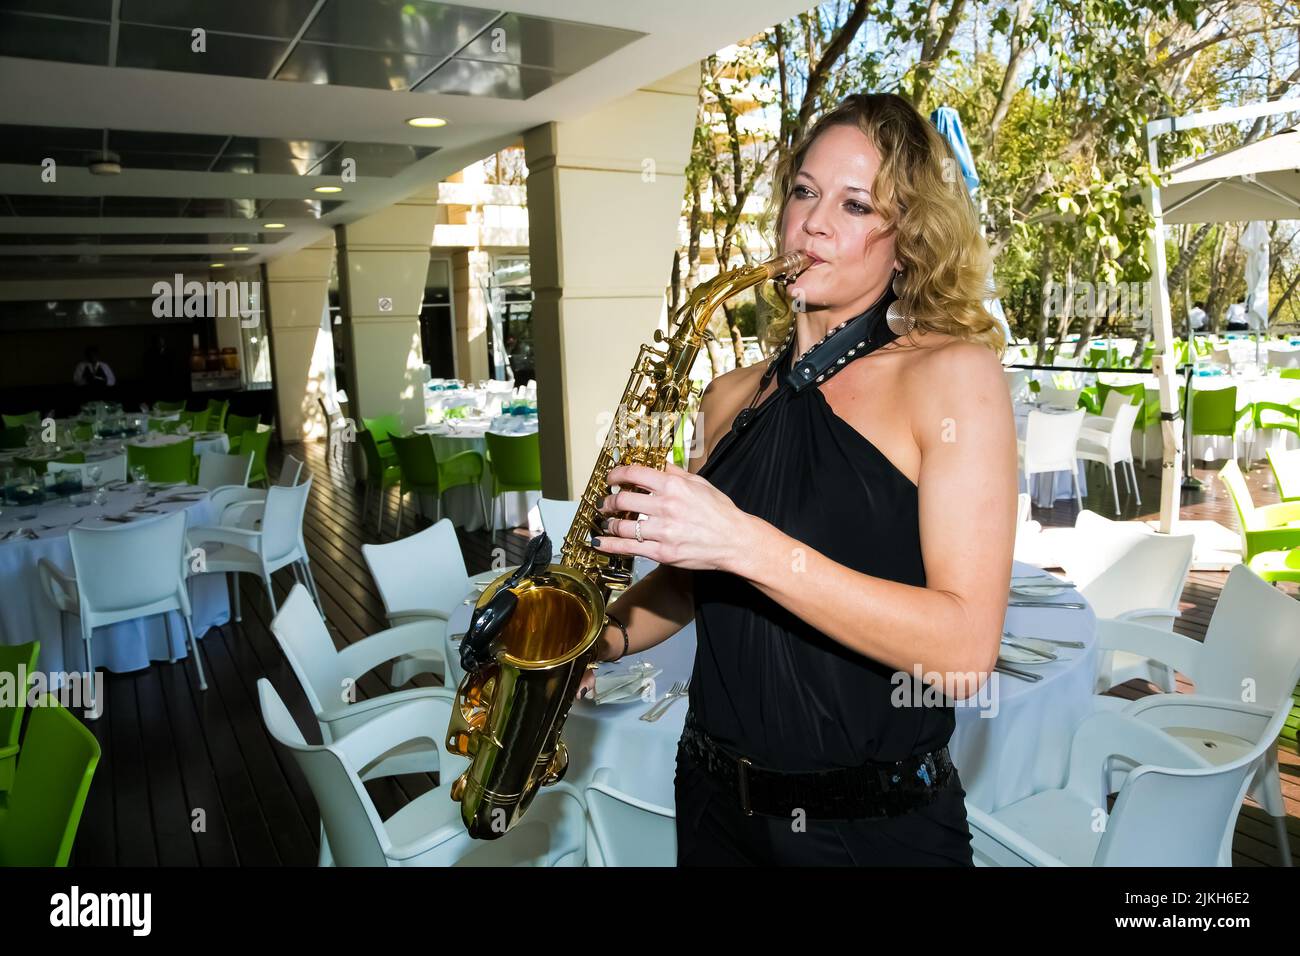 A female musician playing saxophone at outdoor venue Stock Photo